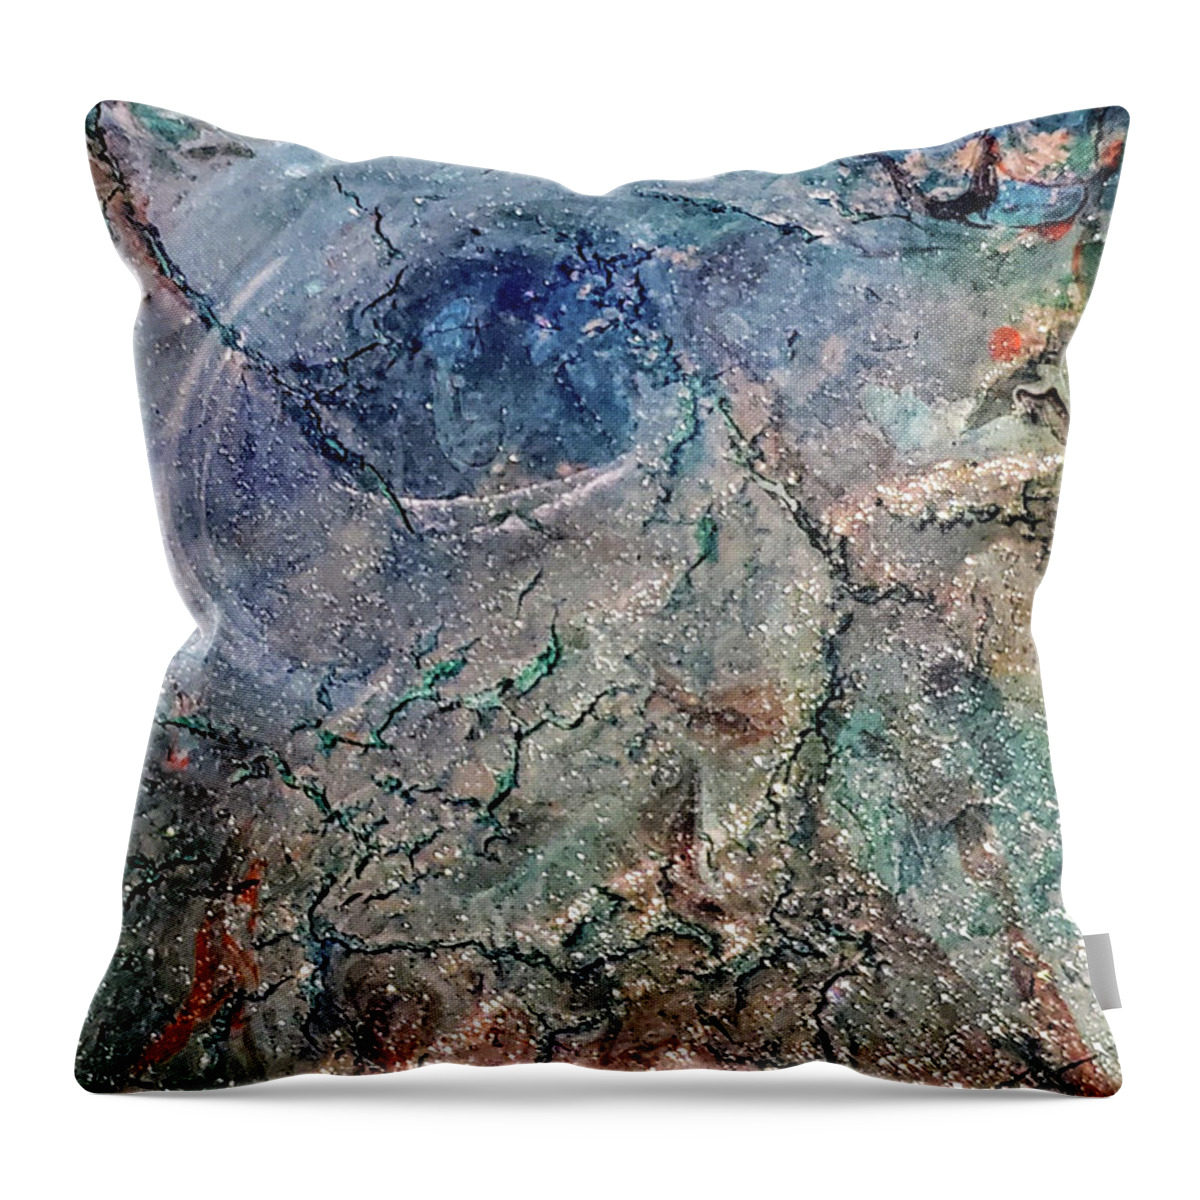  Throw Pillow featuring the painting Untitled #15 by Karen Lillard